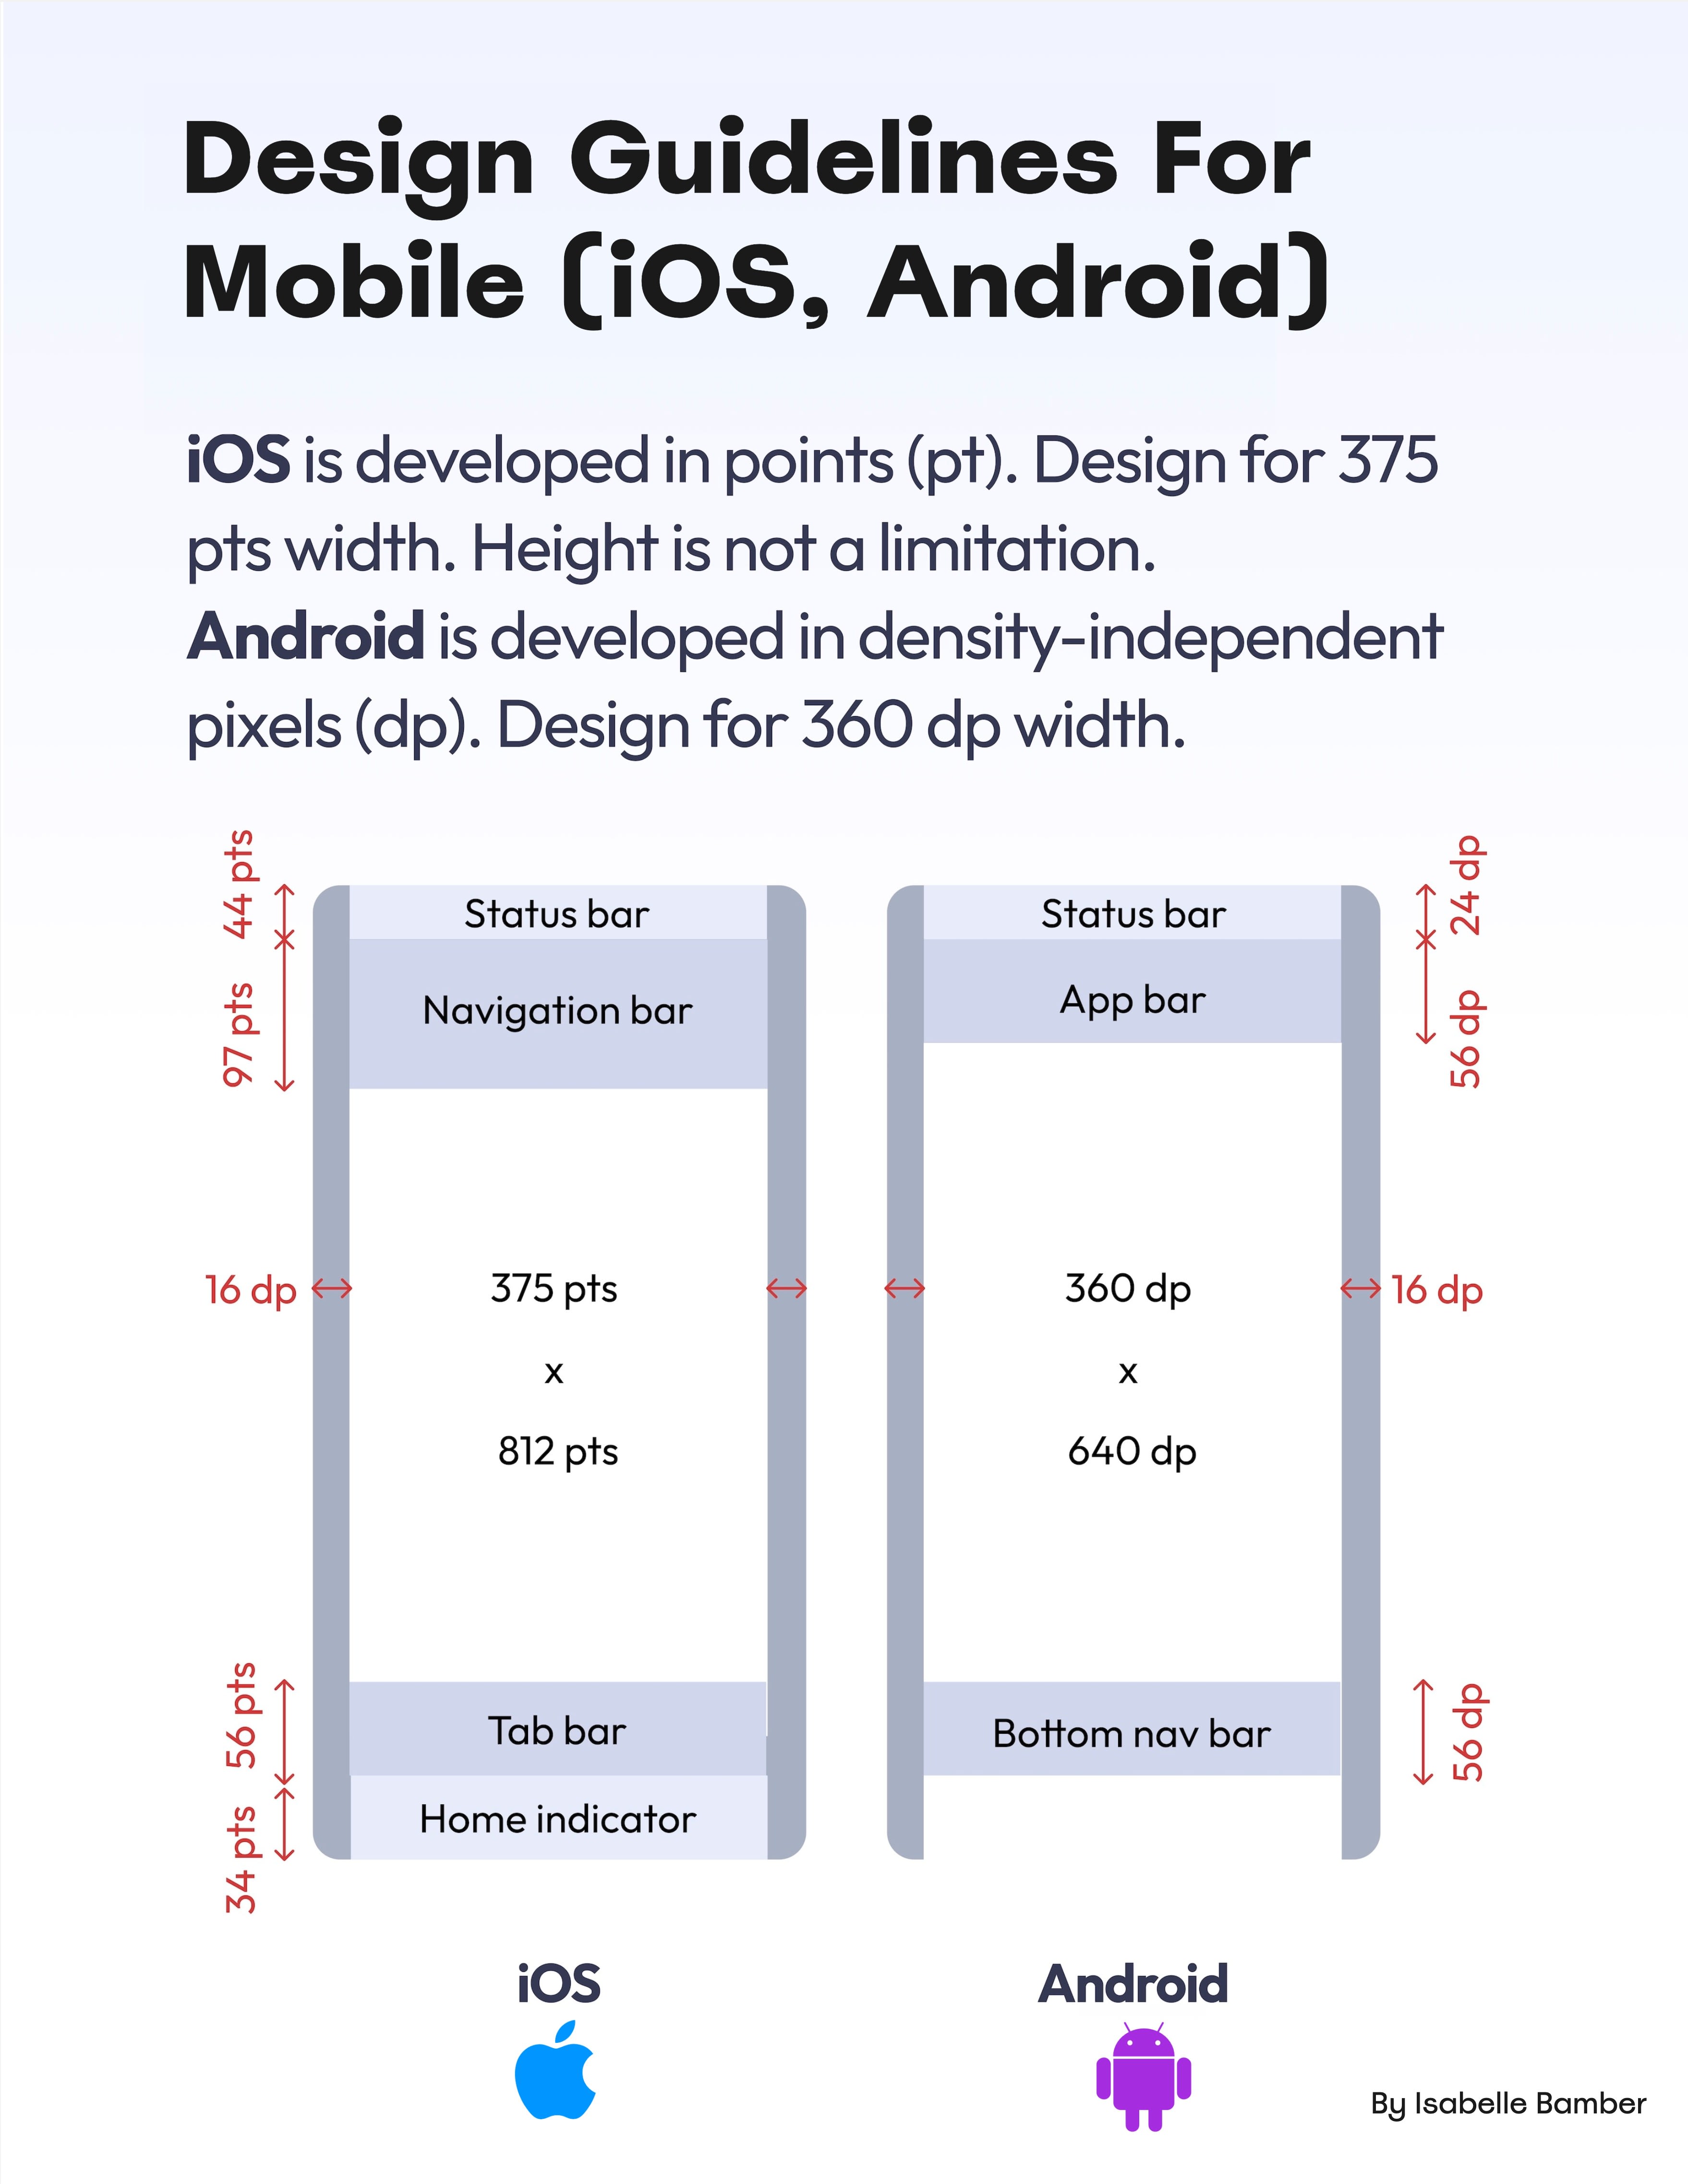 A Guide To Designing For Mobile (iOS, Android)